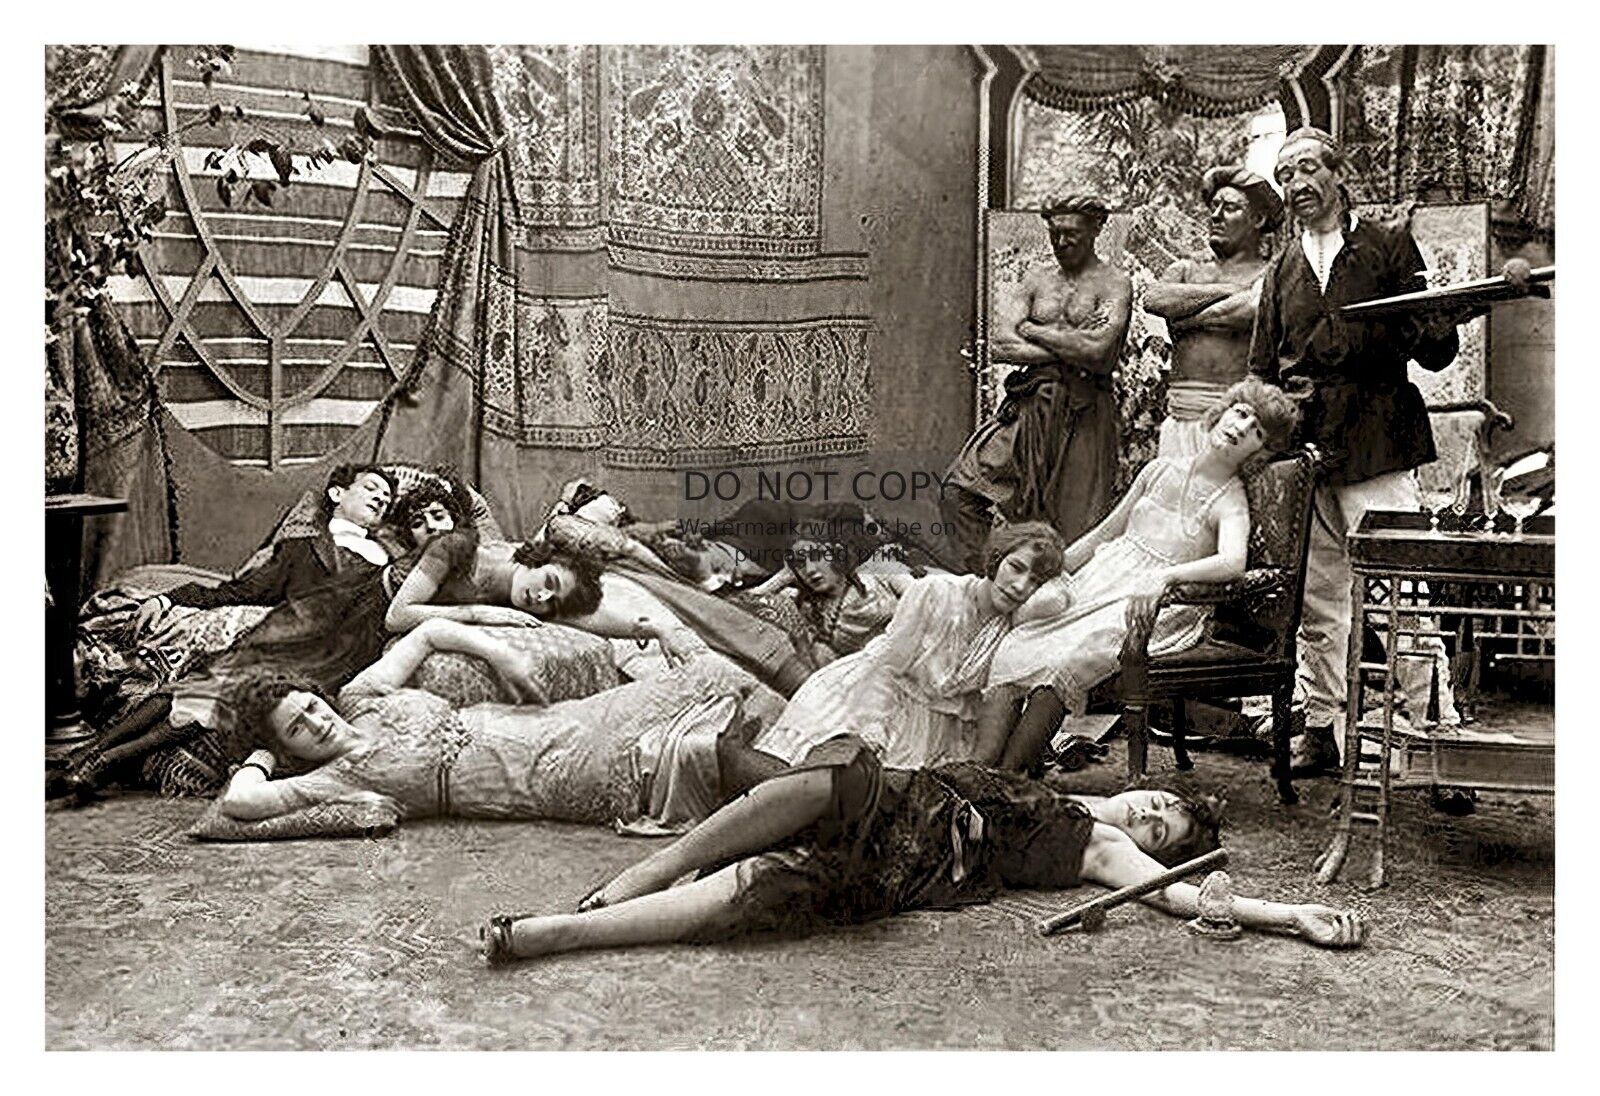 FRENCH OPIUM PARTY 1918 HISTORIC 4X6 PHOTO